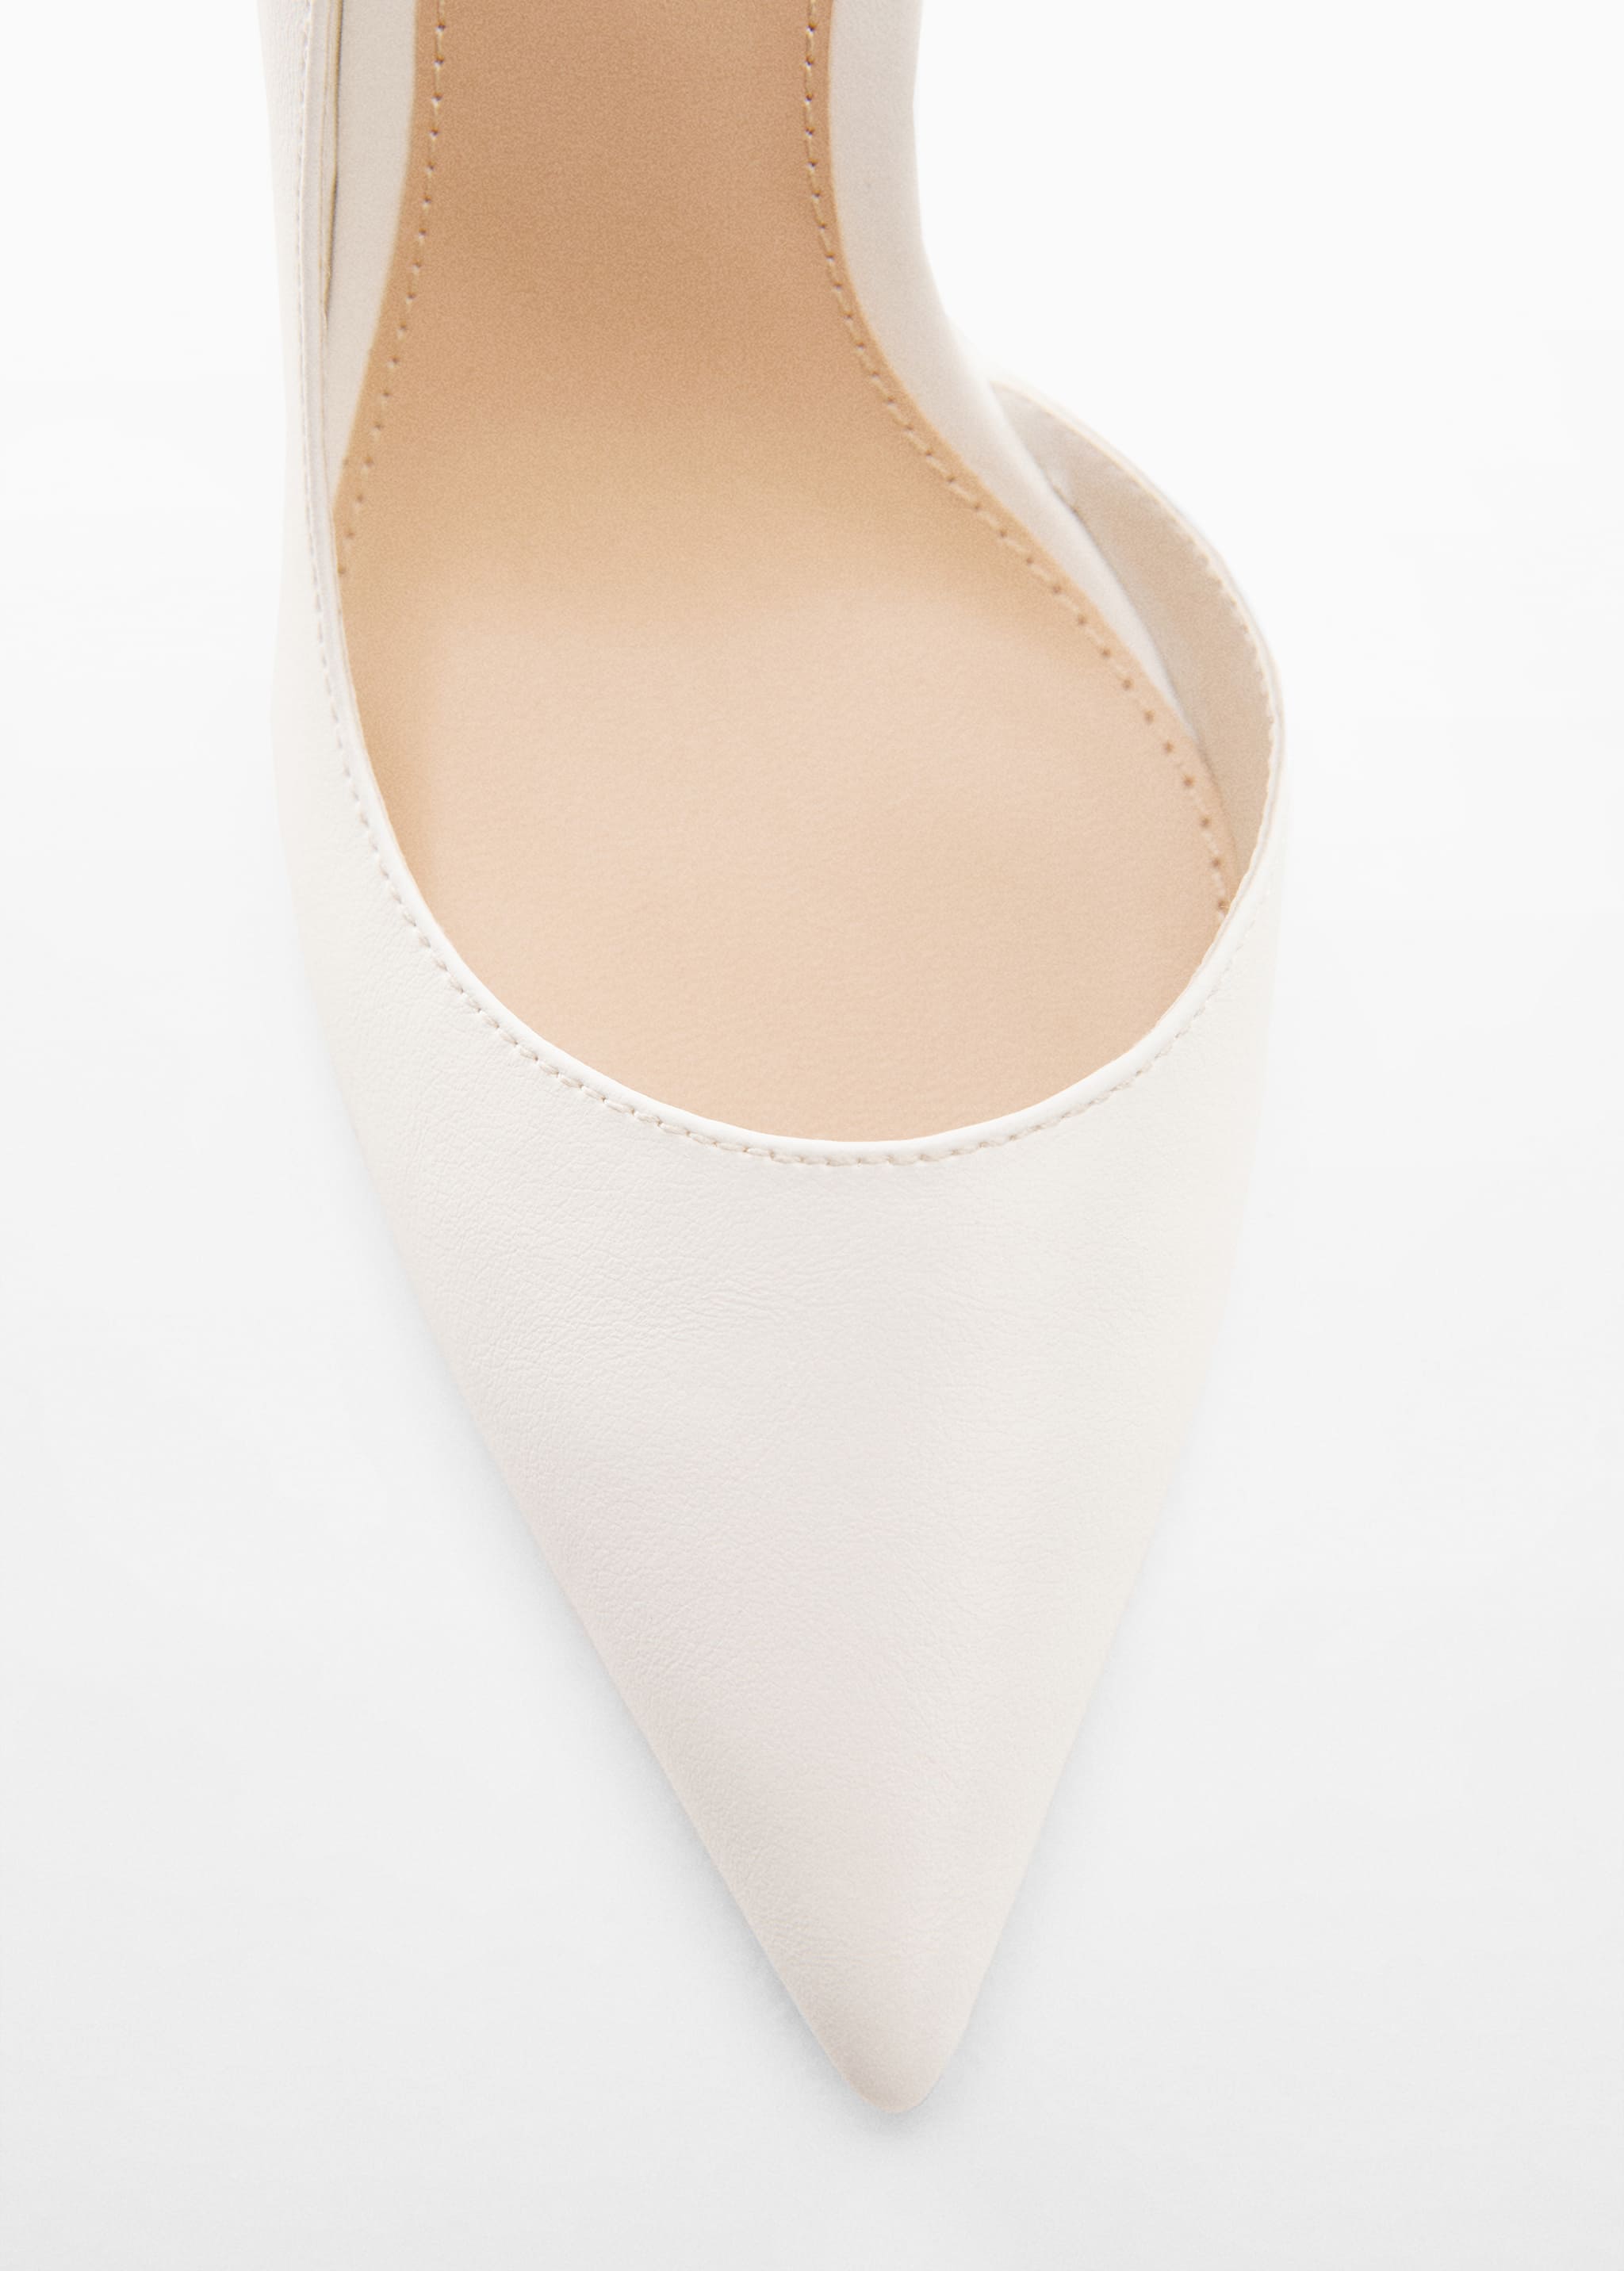 Asymmetrical heeled shoes - Details of the article 2